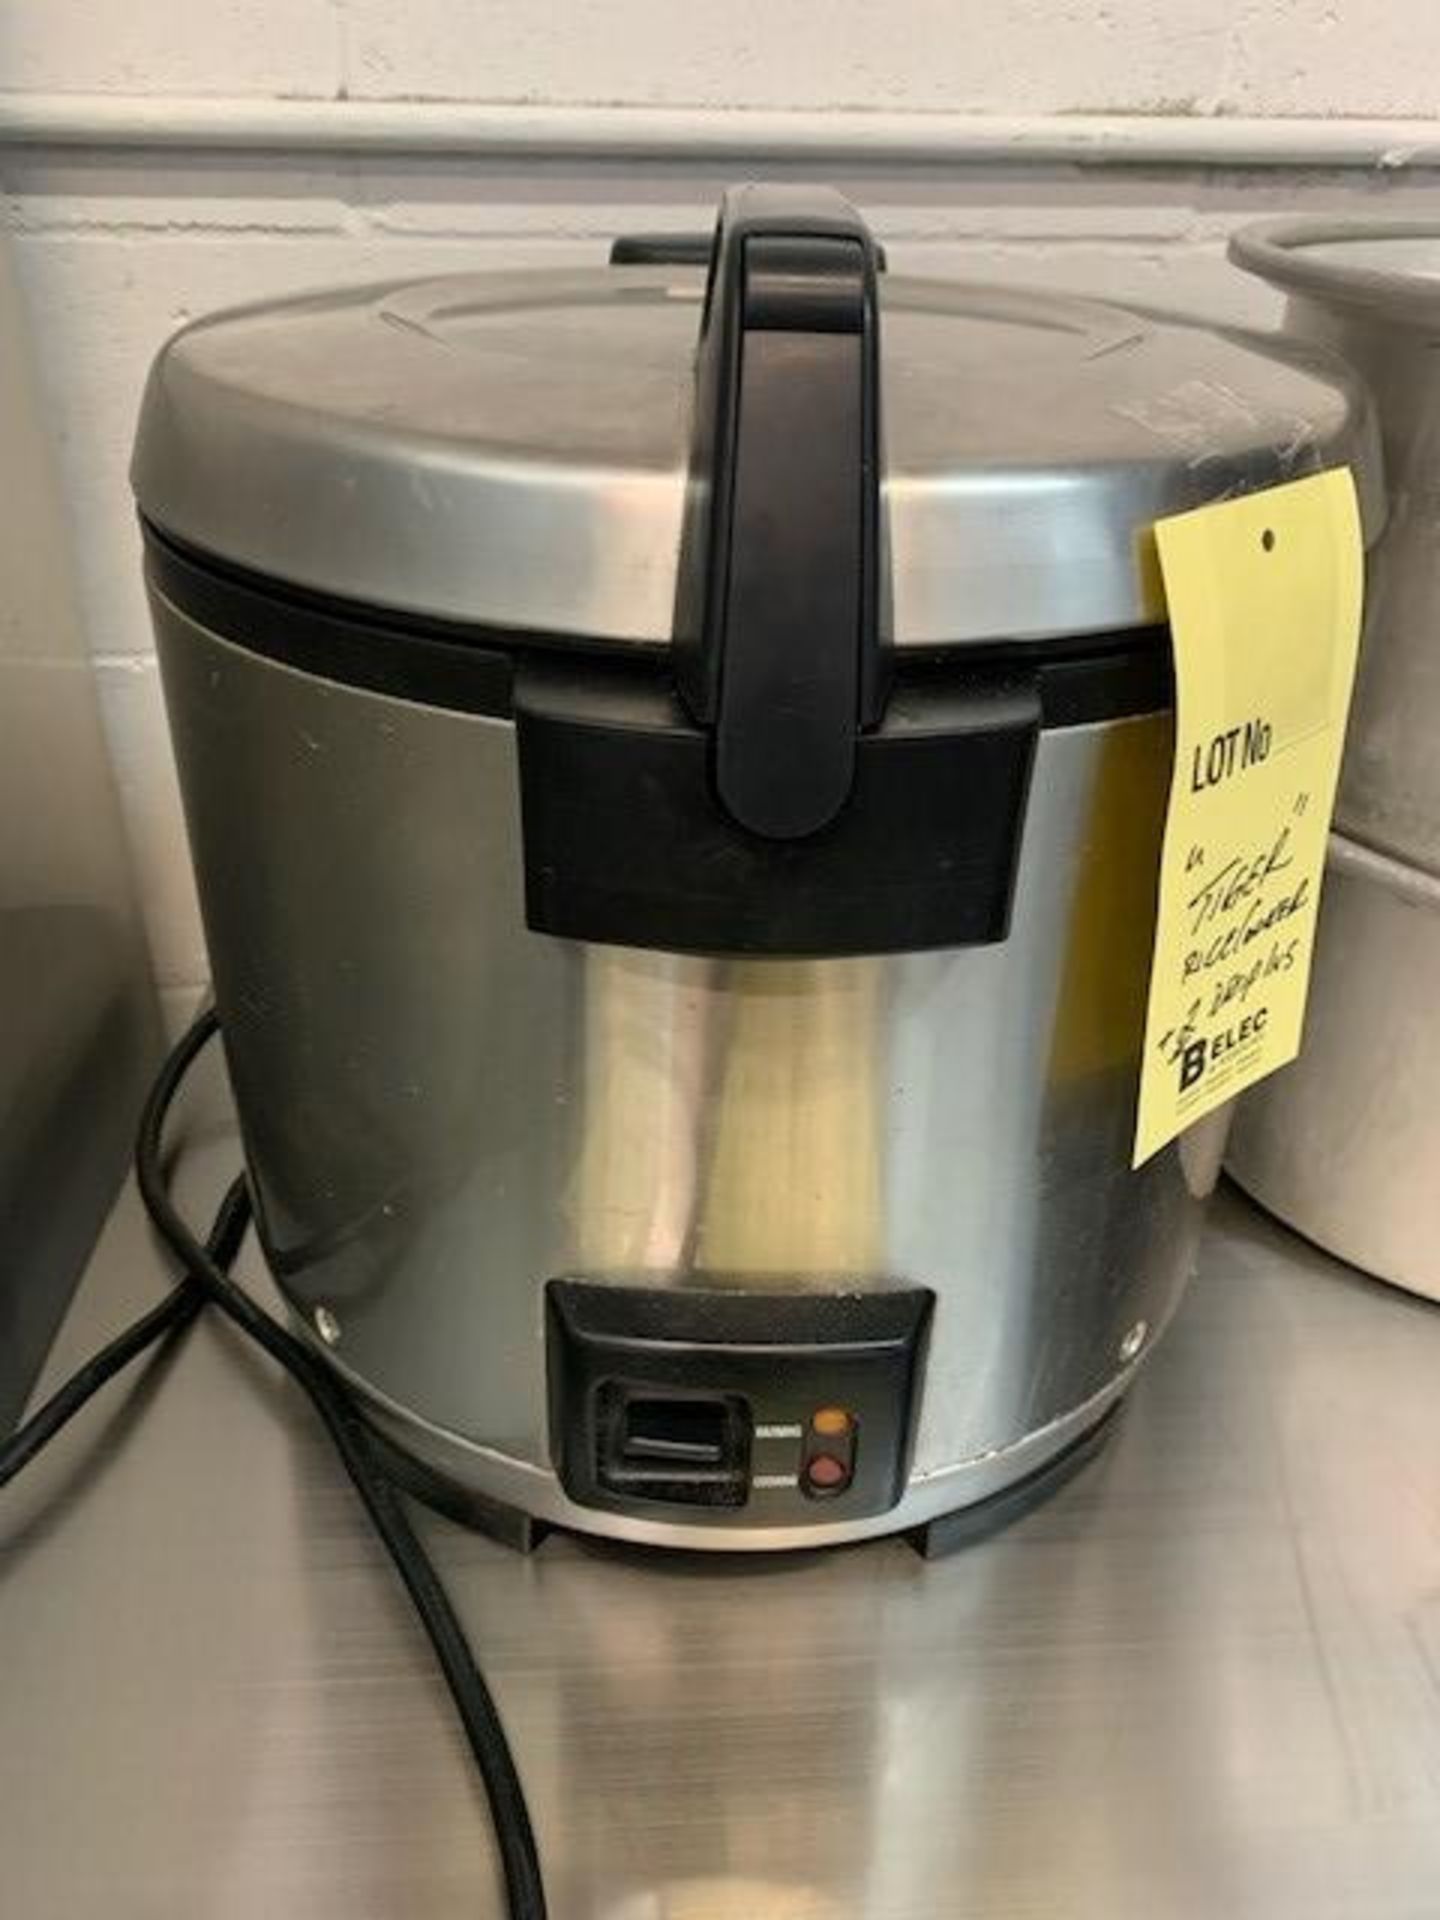 Tiger Rice cooker